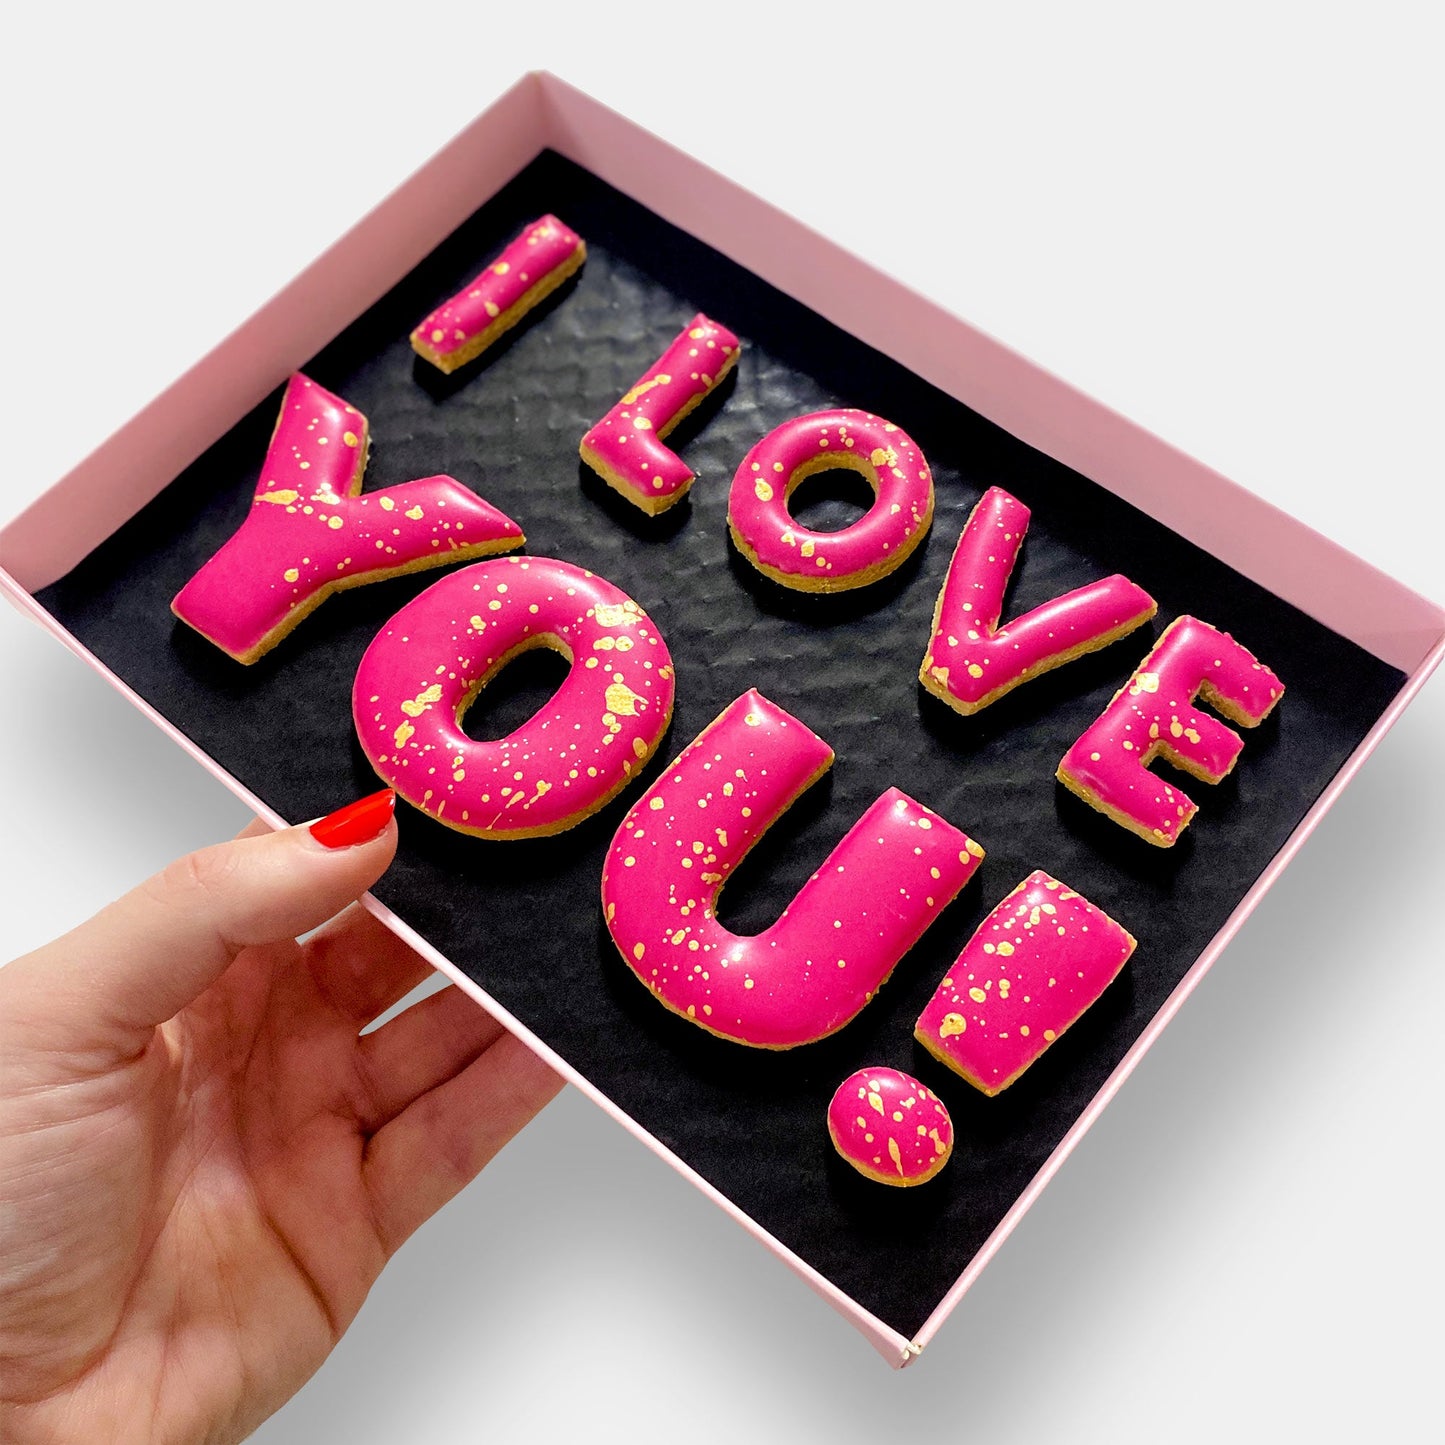 Vegan I Love You Letterbox Message Cookies